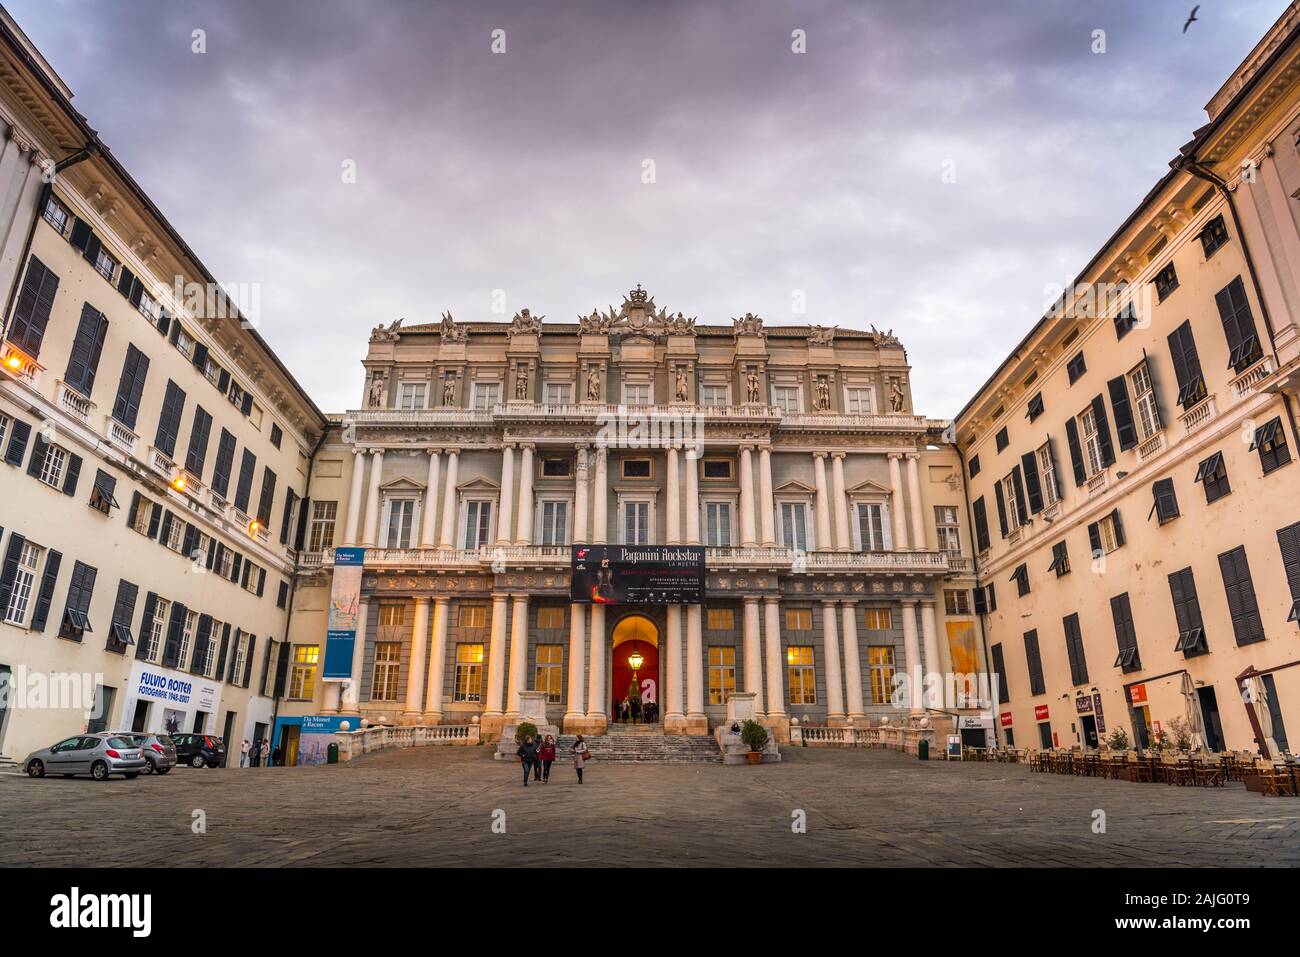 Genova, Genoa, Italy: Wide angle view of the facade of Palazzo Ducale (old Doge's Palace) from Piazza Matteotti Stock Photo